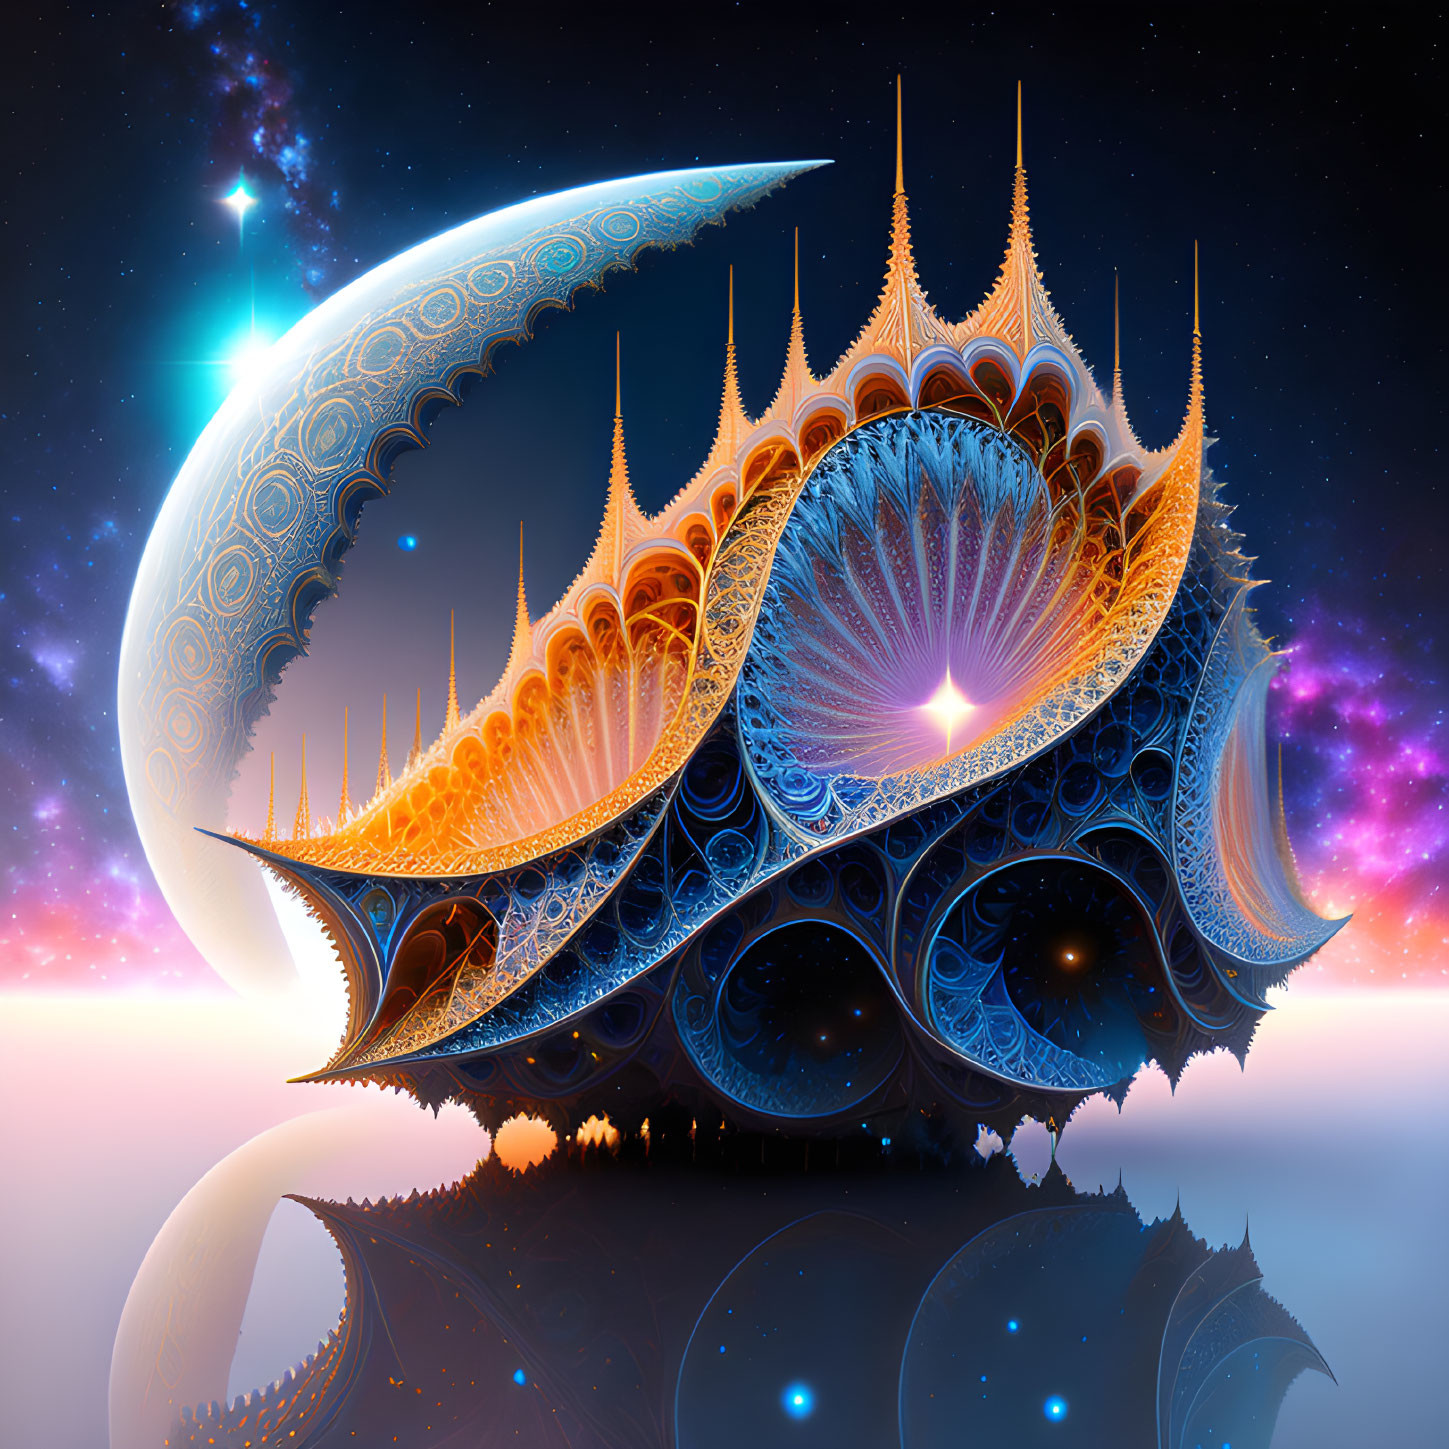 Colorful Fractal Art: Intricate Structure with Spires, Stars, and Moon